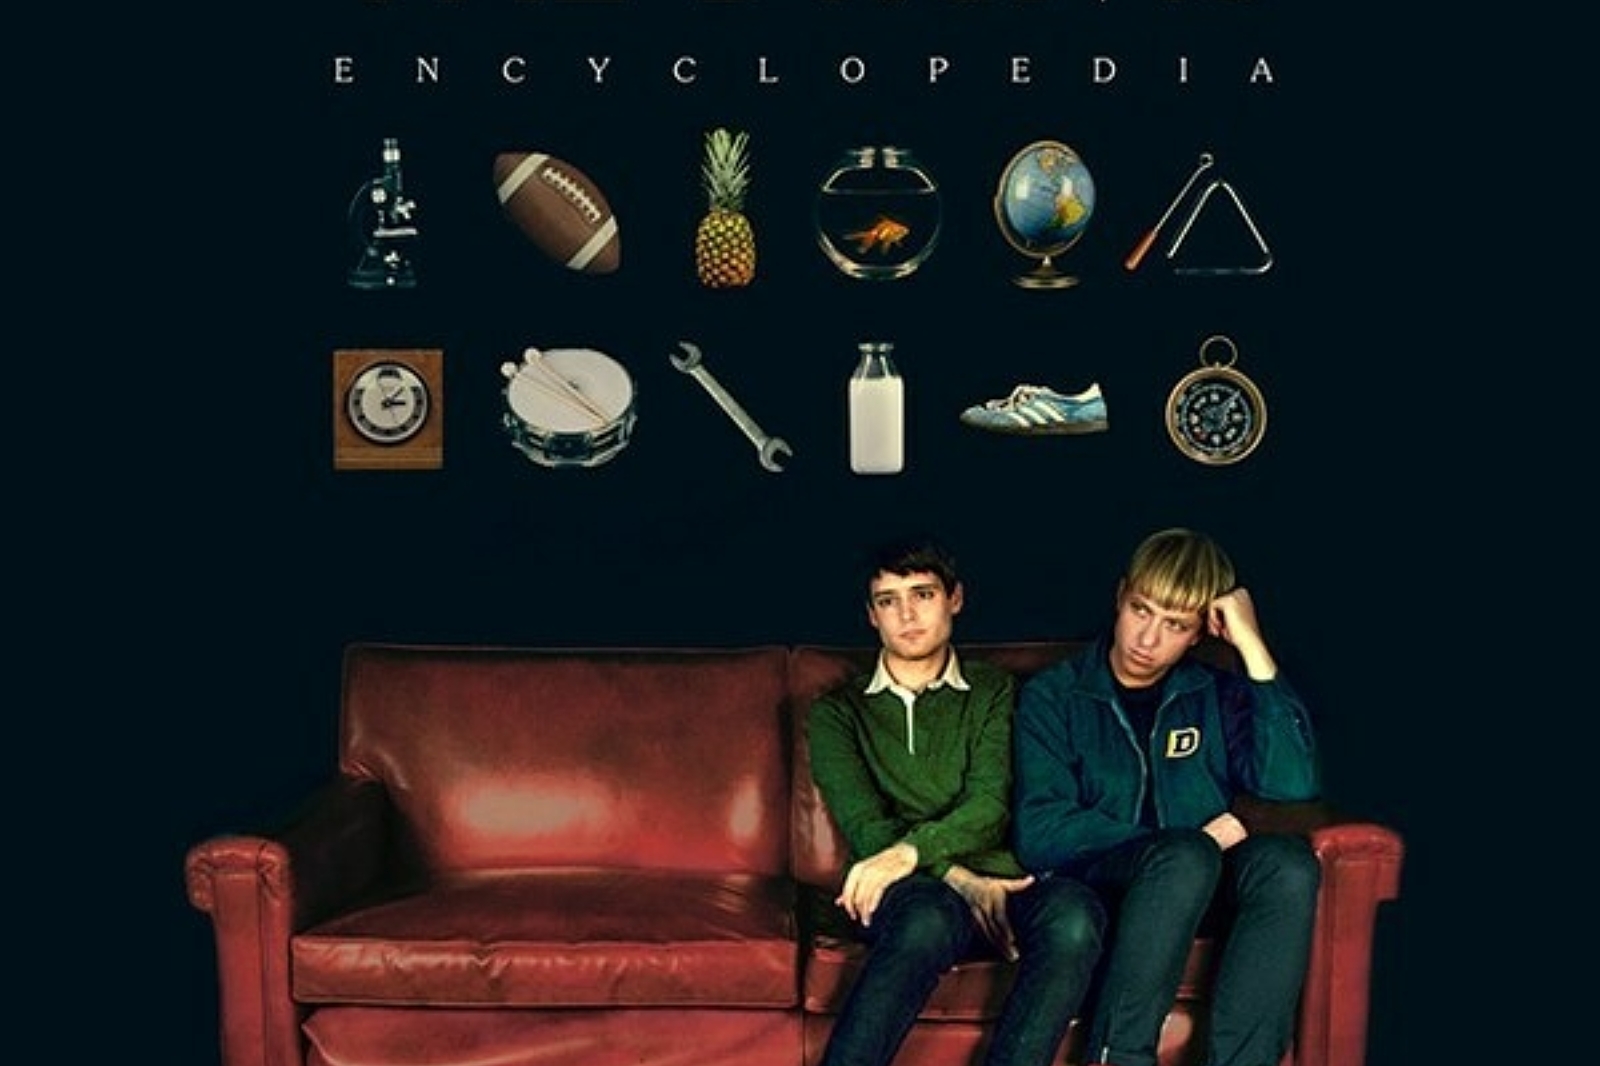 The Drums - Encyclopedia